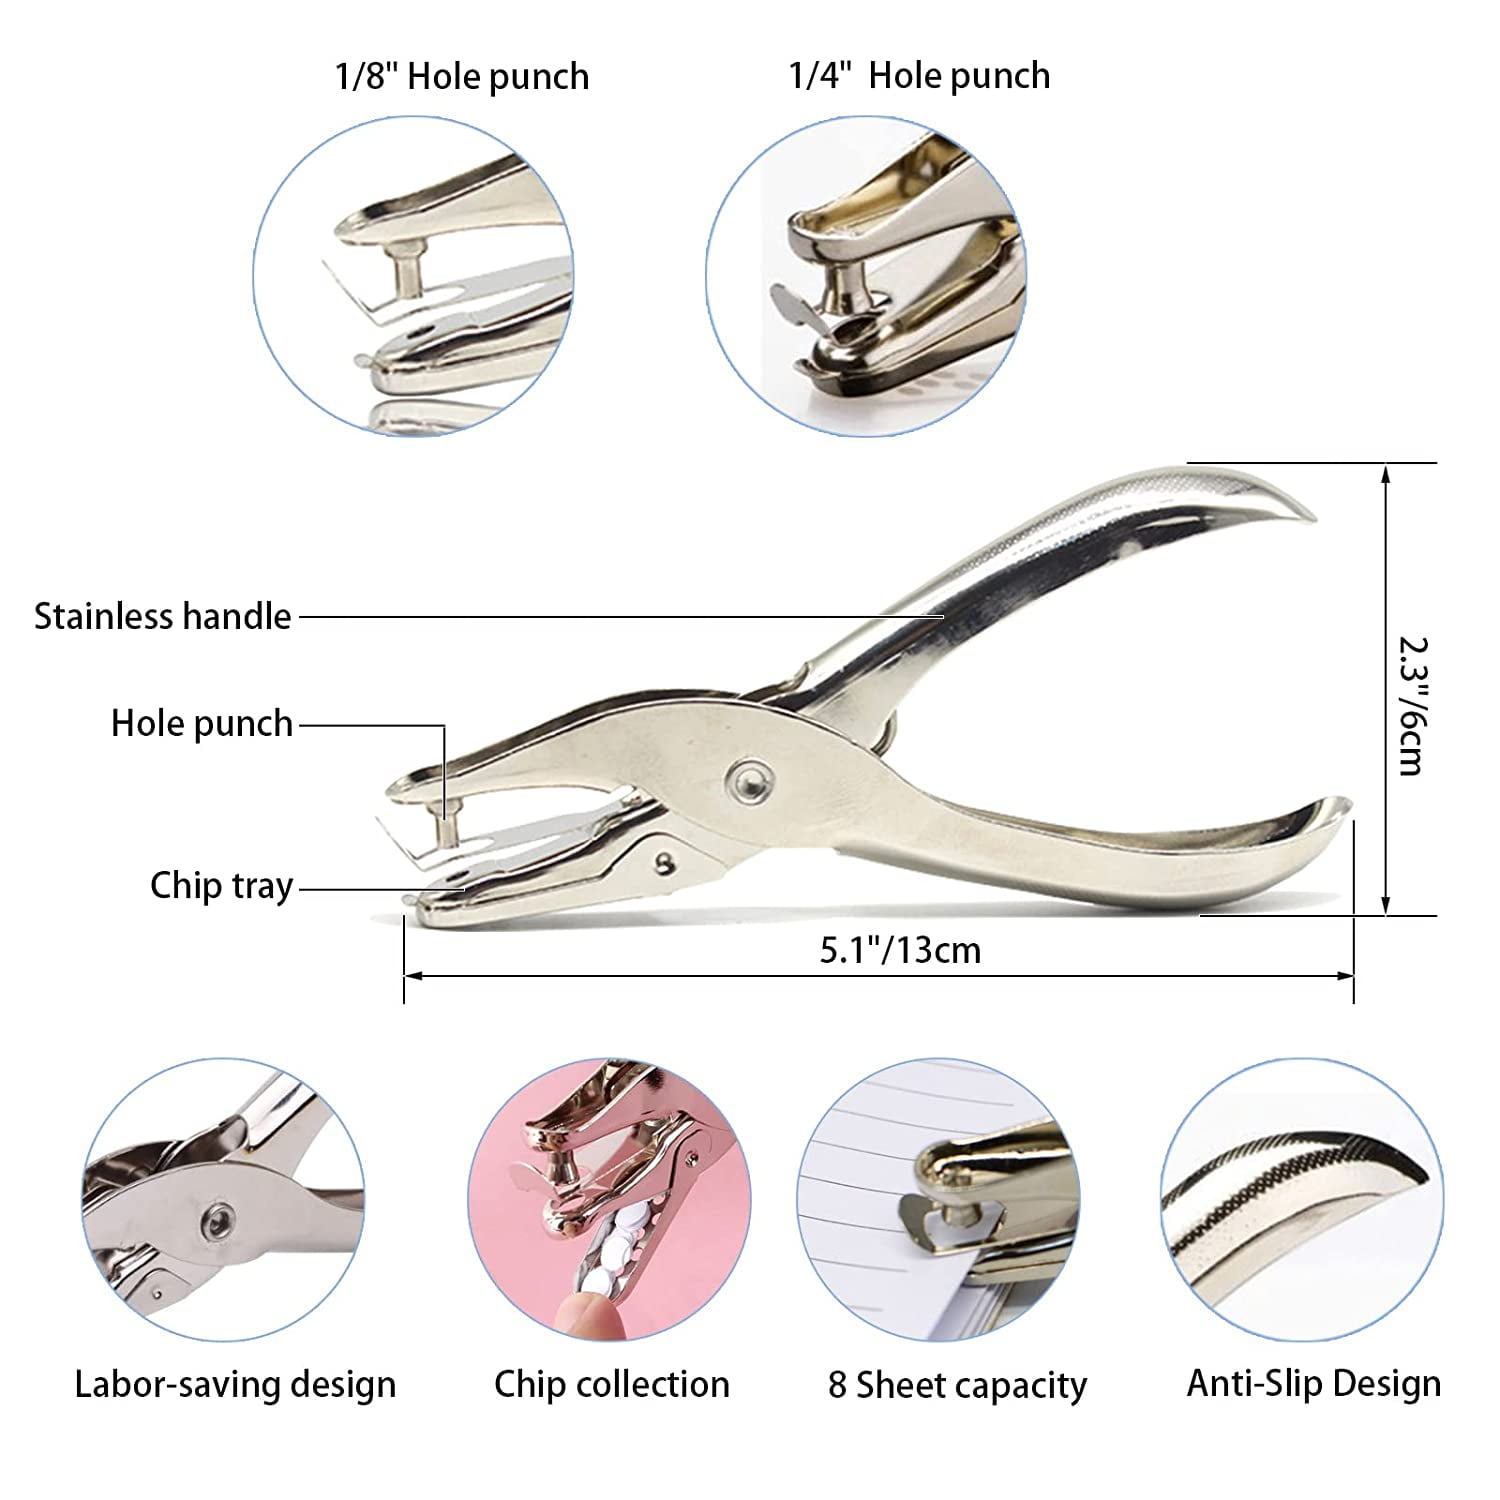  Small Single Hole Punch 1/4 Inch(6mm), Handheld Circle Shaped  Hole Puncher with 8 Sheet Capacity for DIY Craft Paper, Tag & Ticket,  Perfect for Home Office School Supplies : Arts